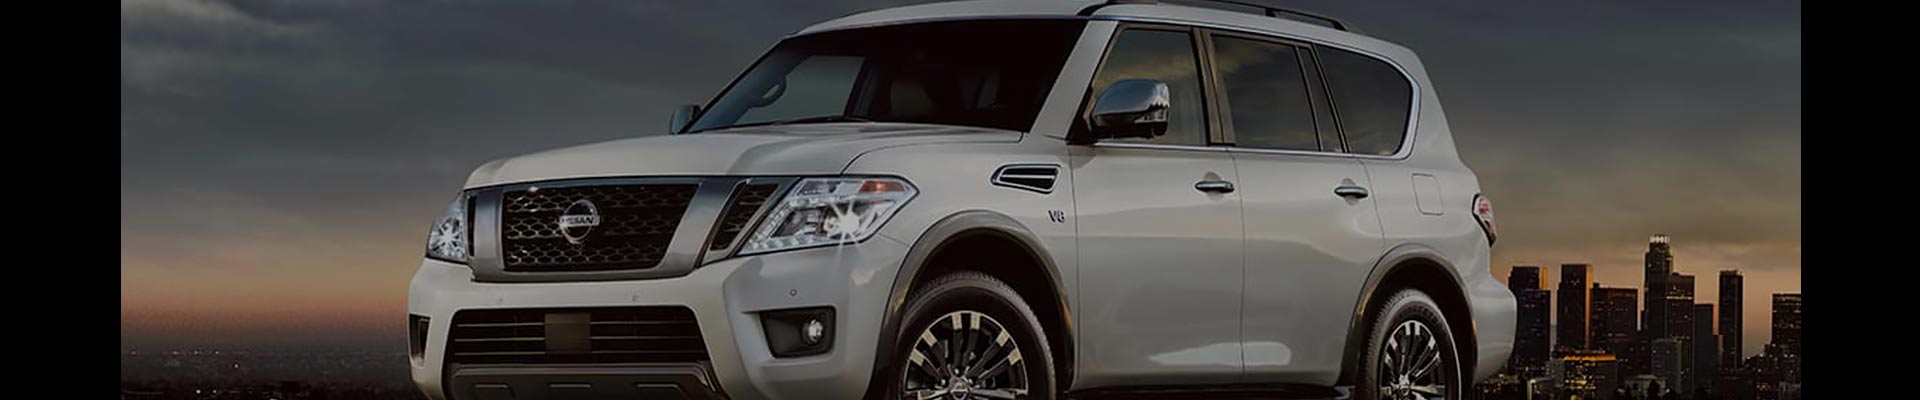 Shop Replacement and OEM 2012 Nissan Armada Parts with Discounted Price on the Net